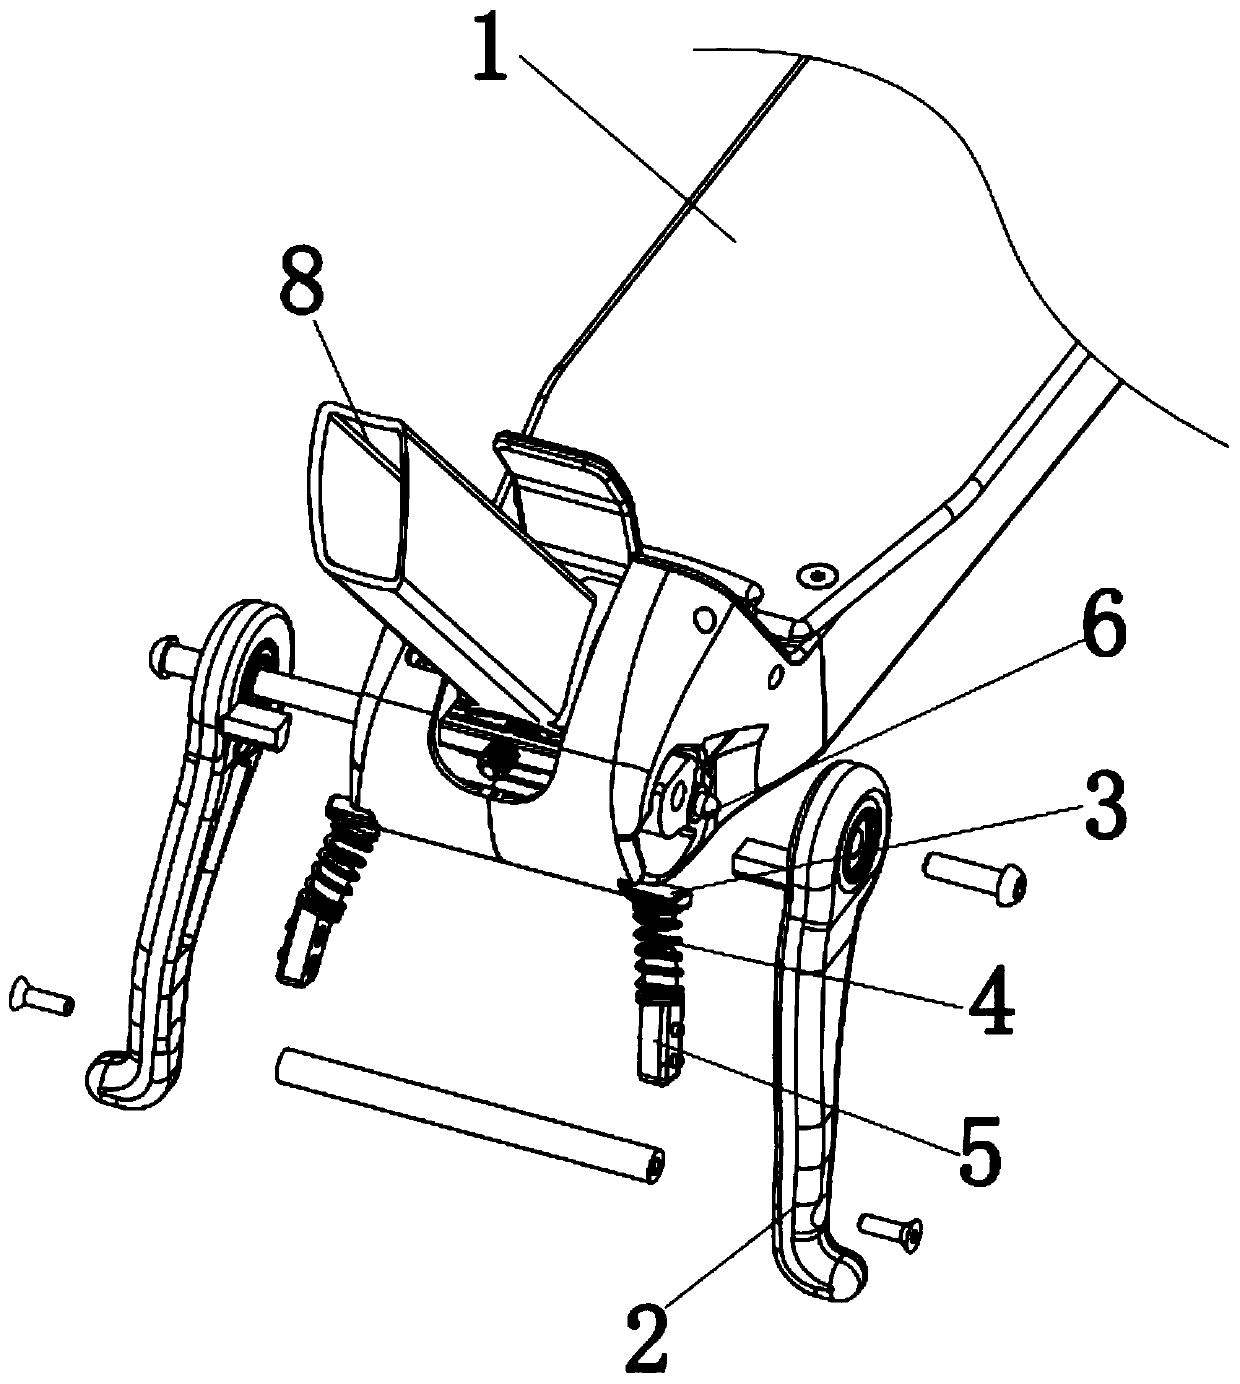 Support structure of electric scooter